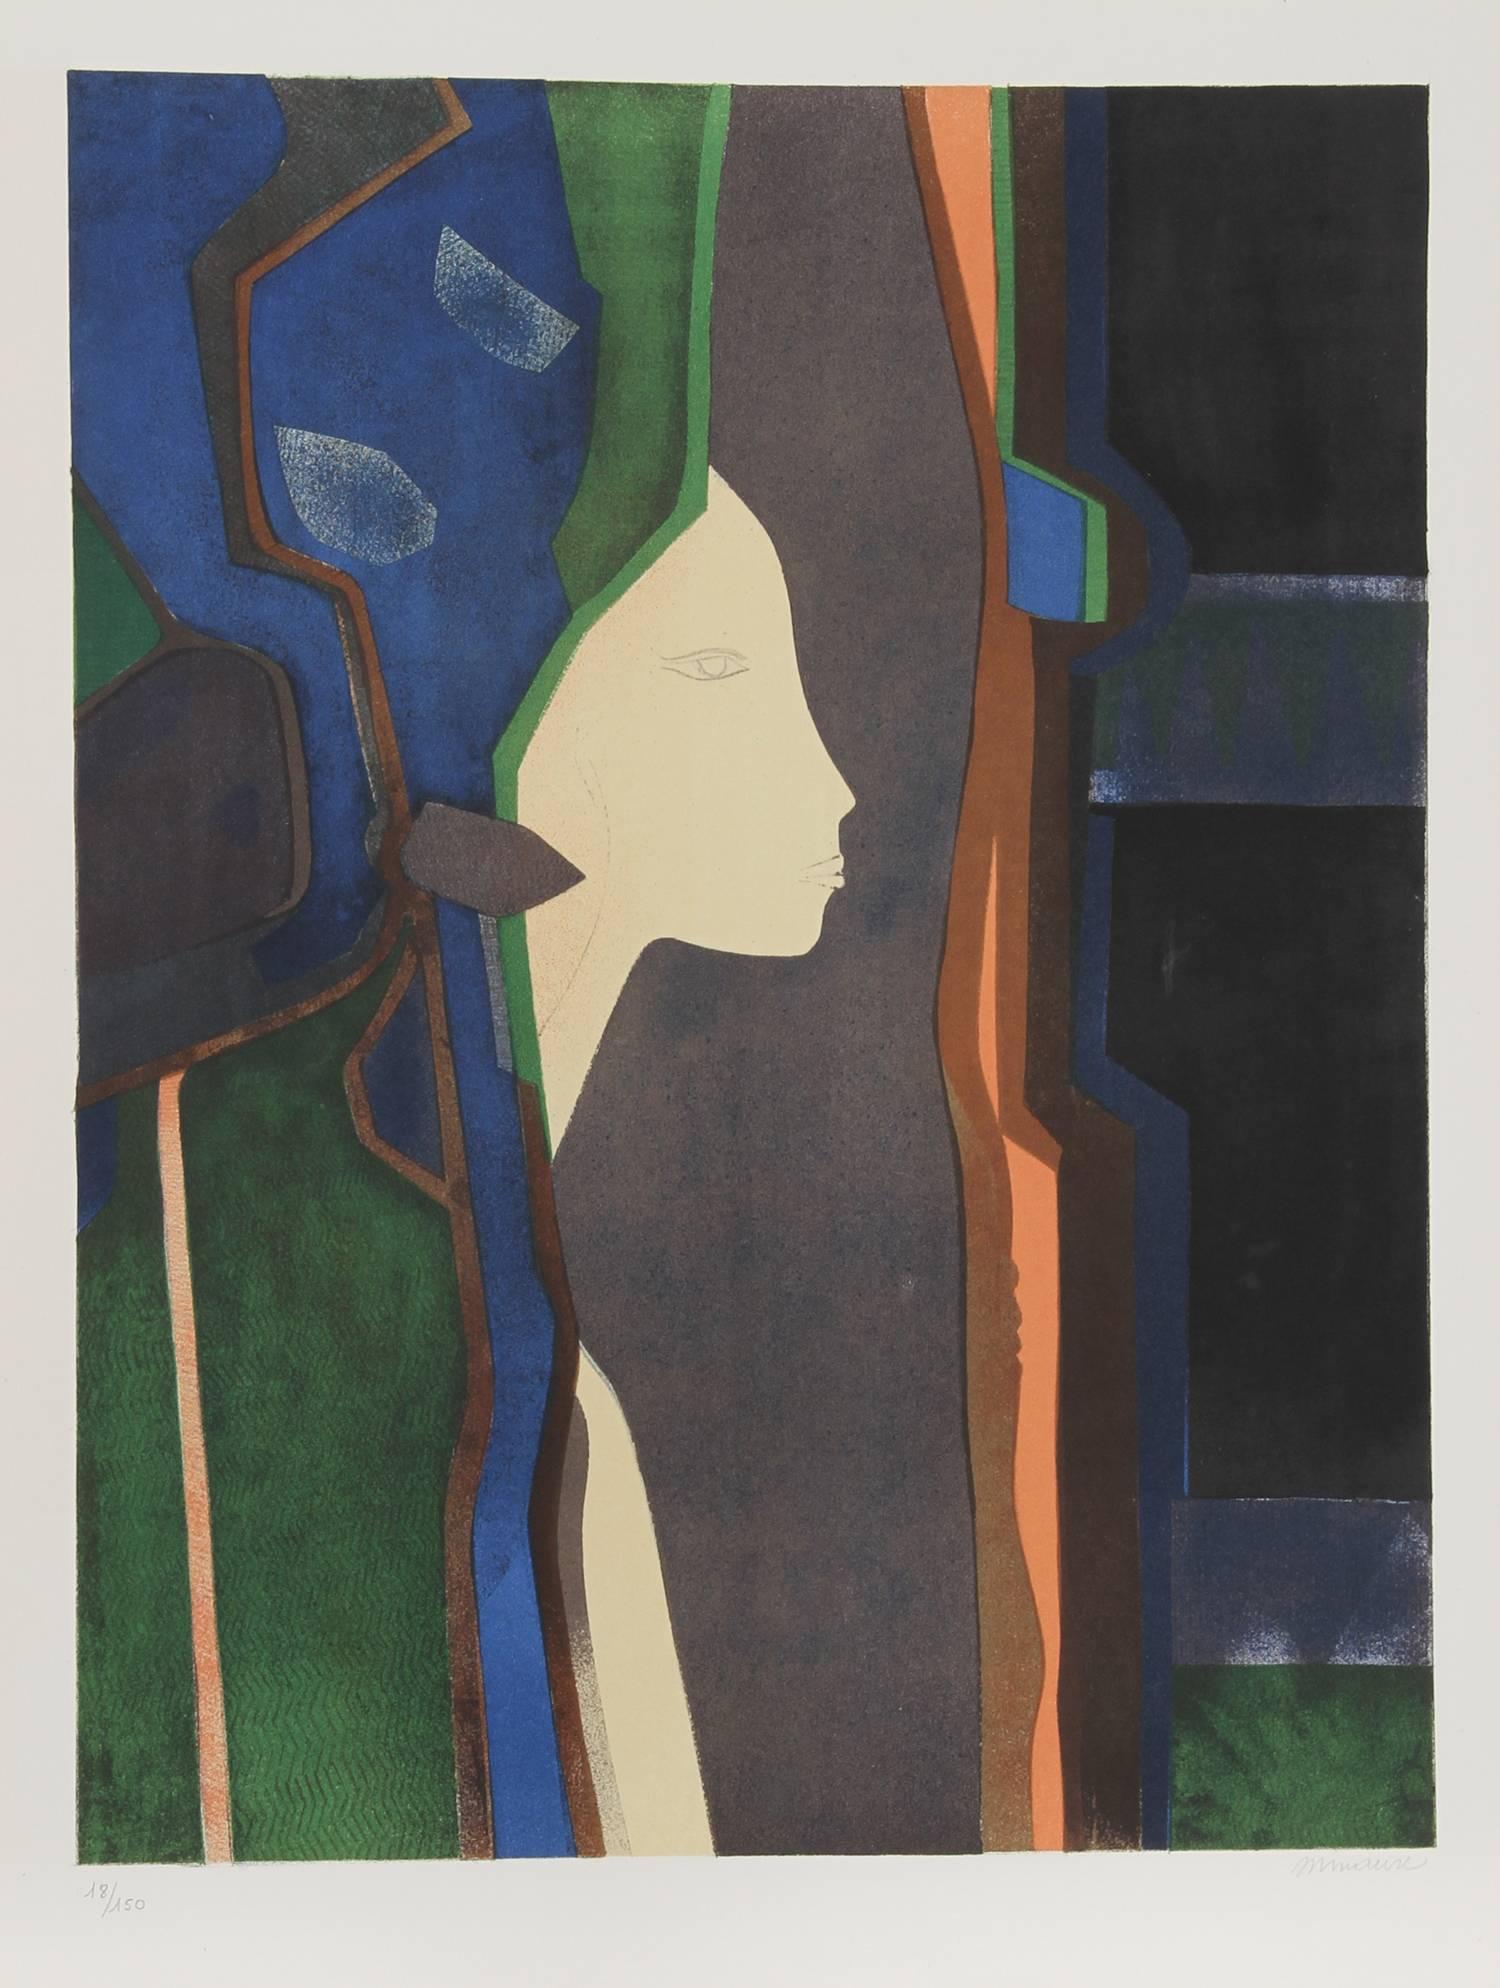 "Dame et Mirroir", 1974, Signed Lithograph by Andre Minaux